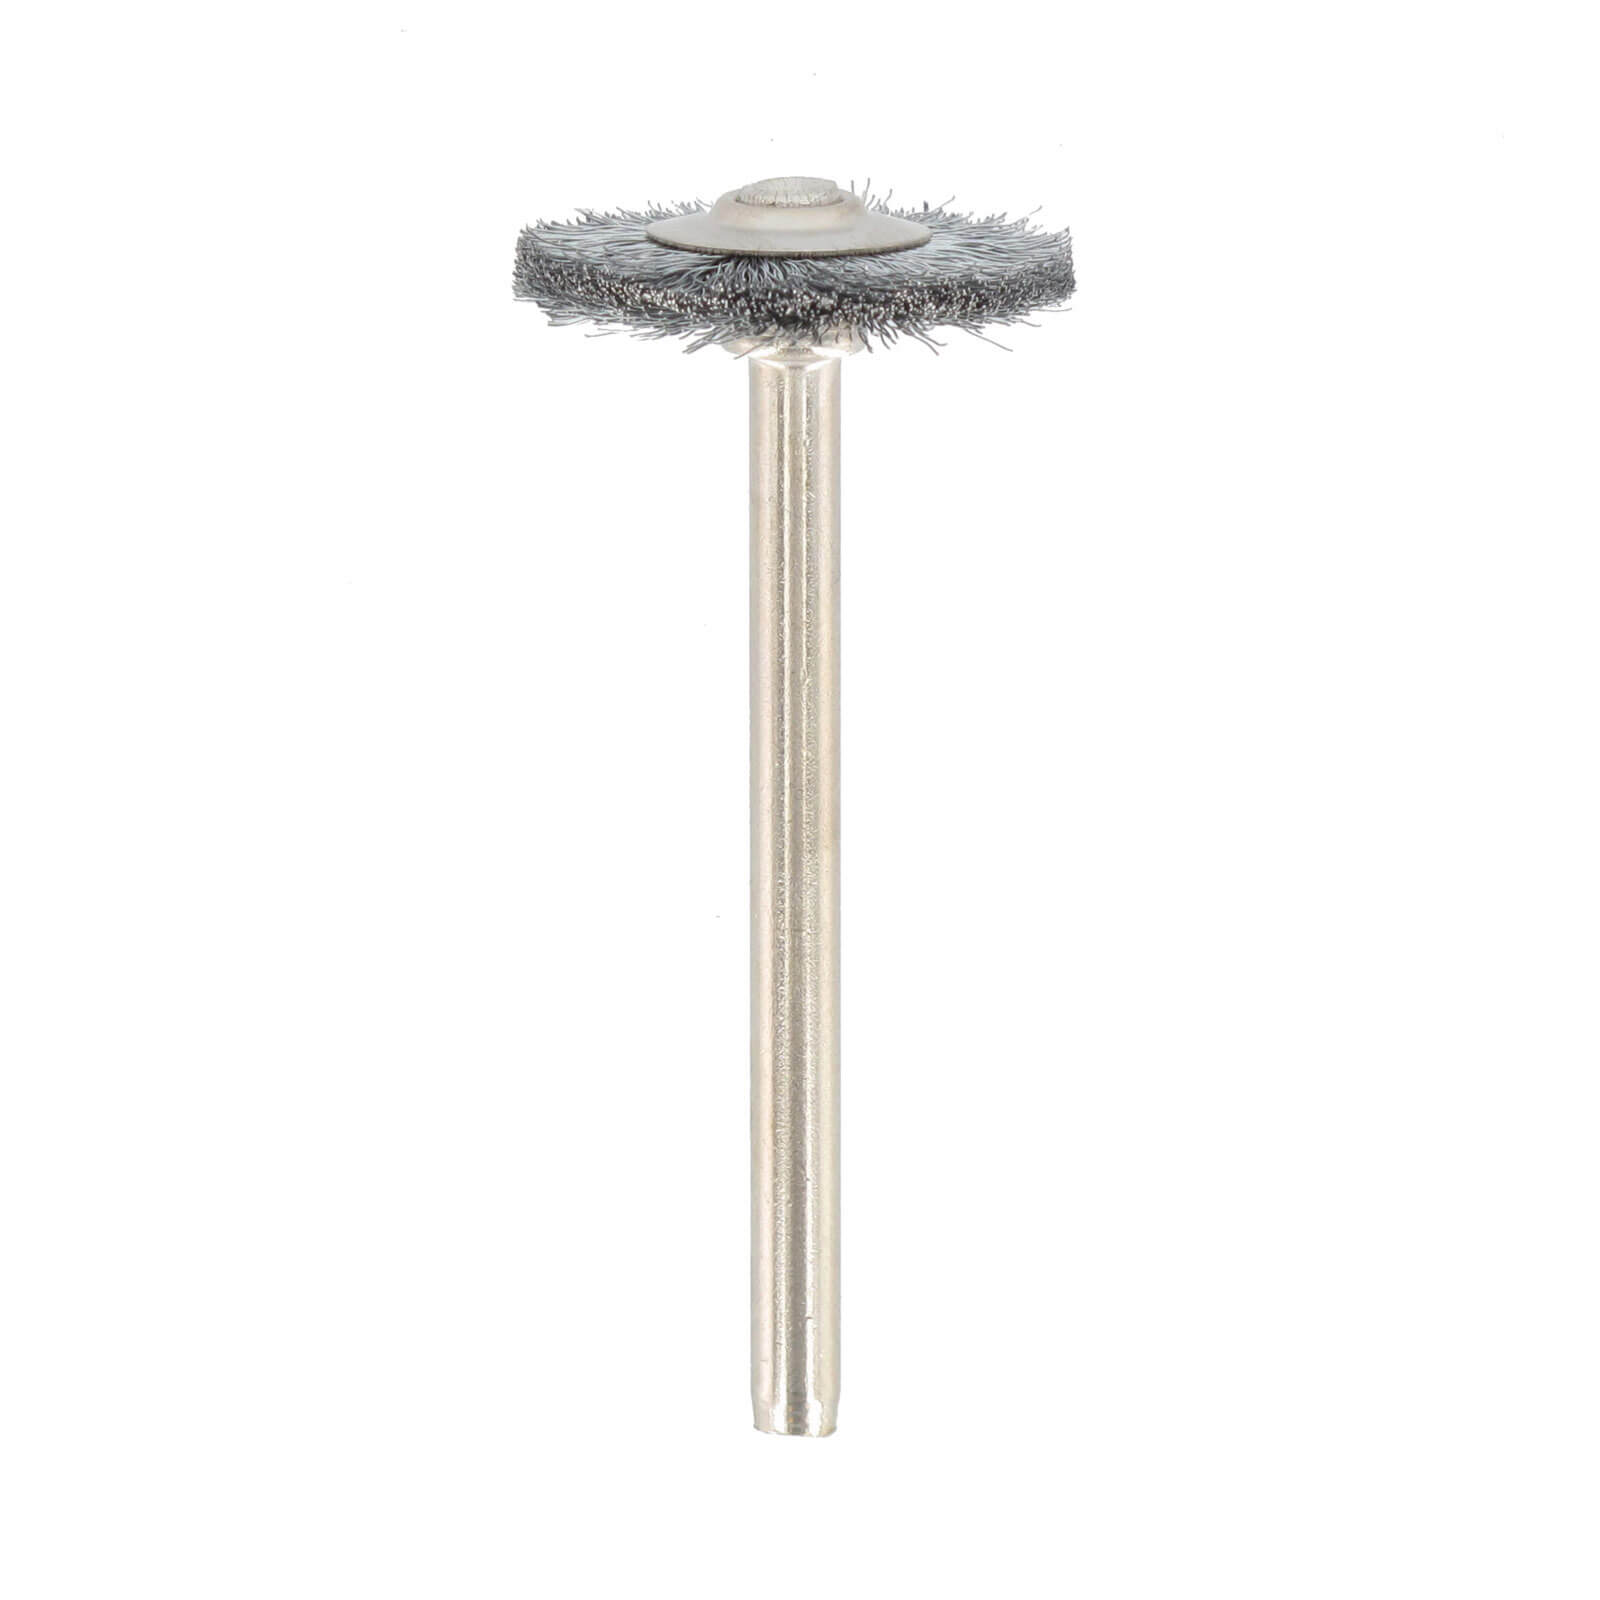 Image of Dremel 428 Carbon Steel Wire Wheel Brush 19mm Pack of 2